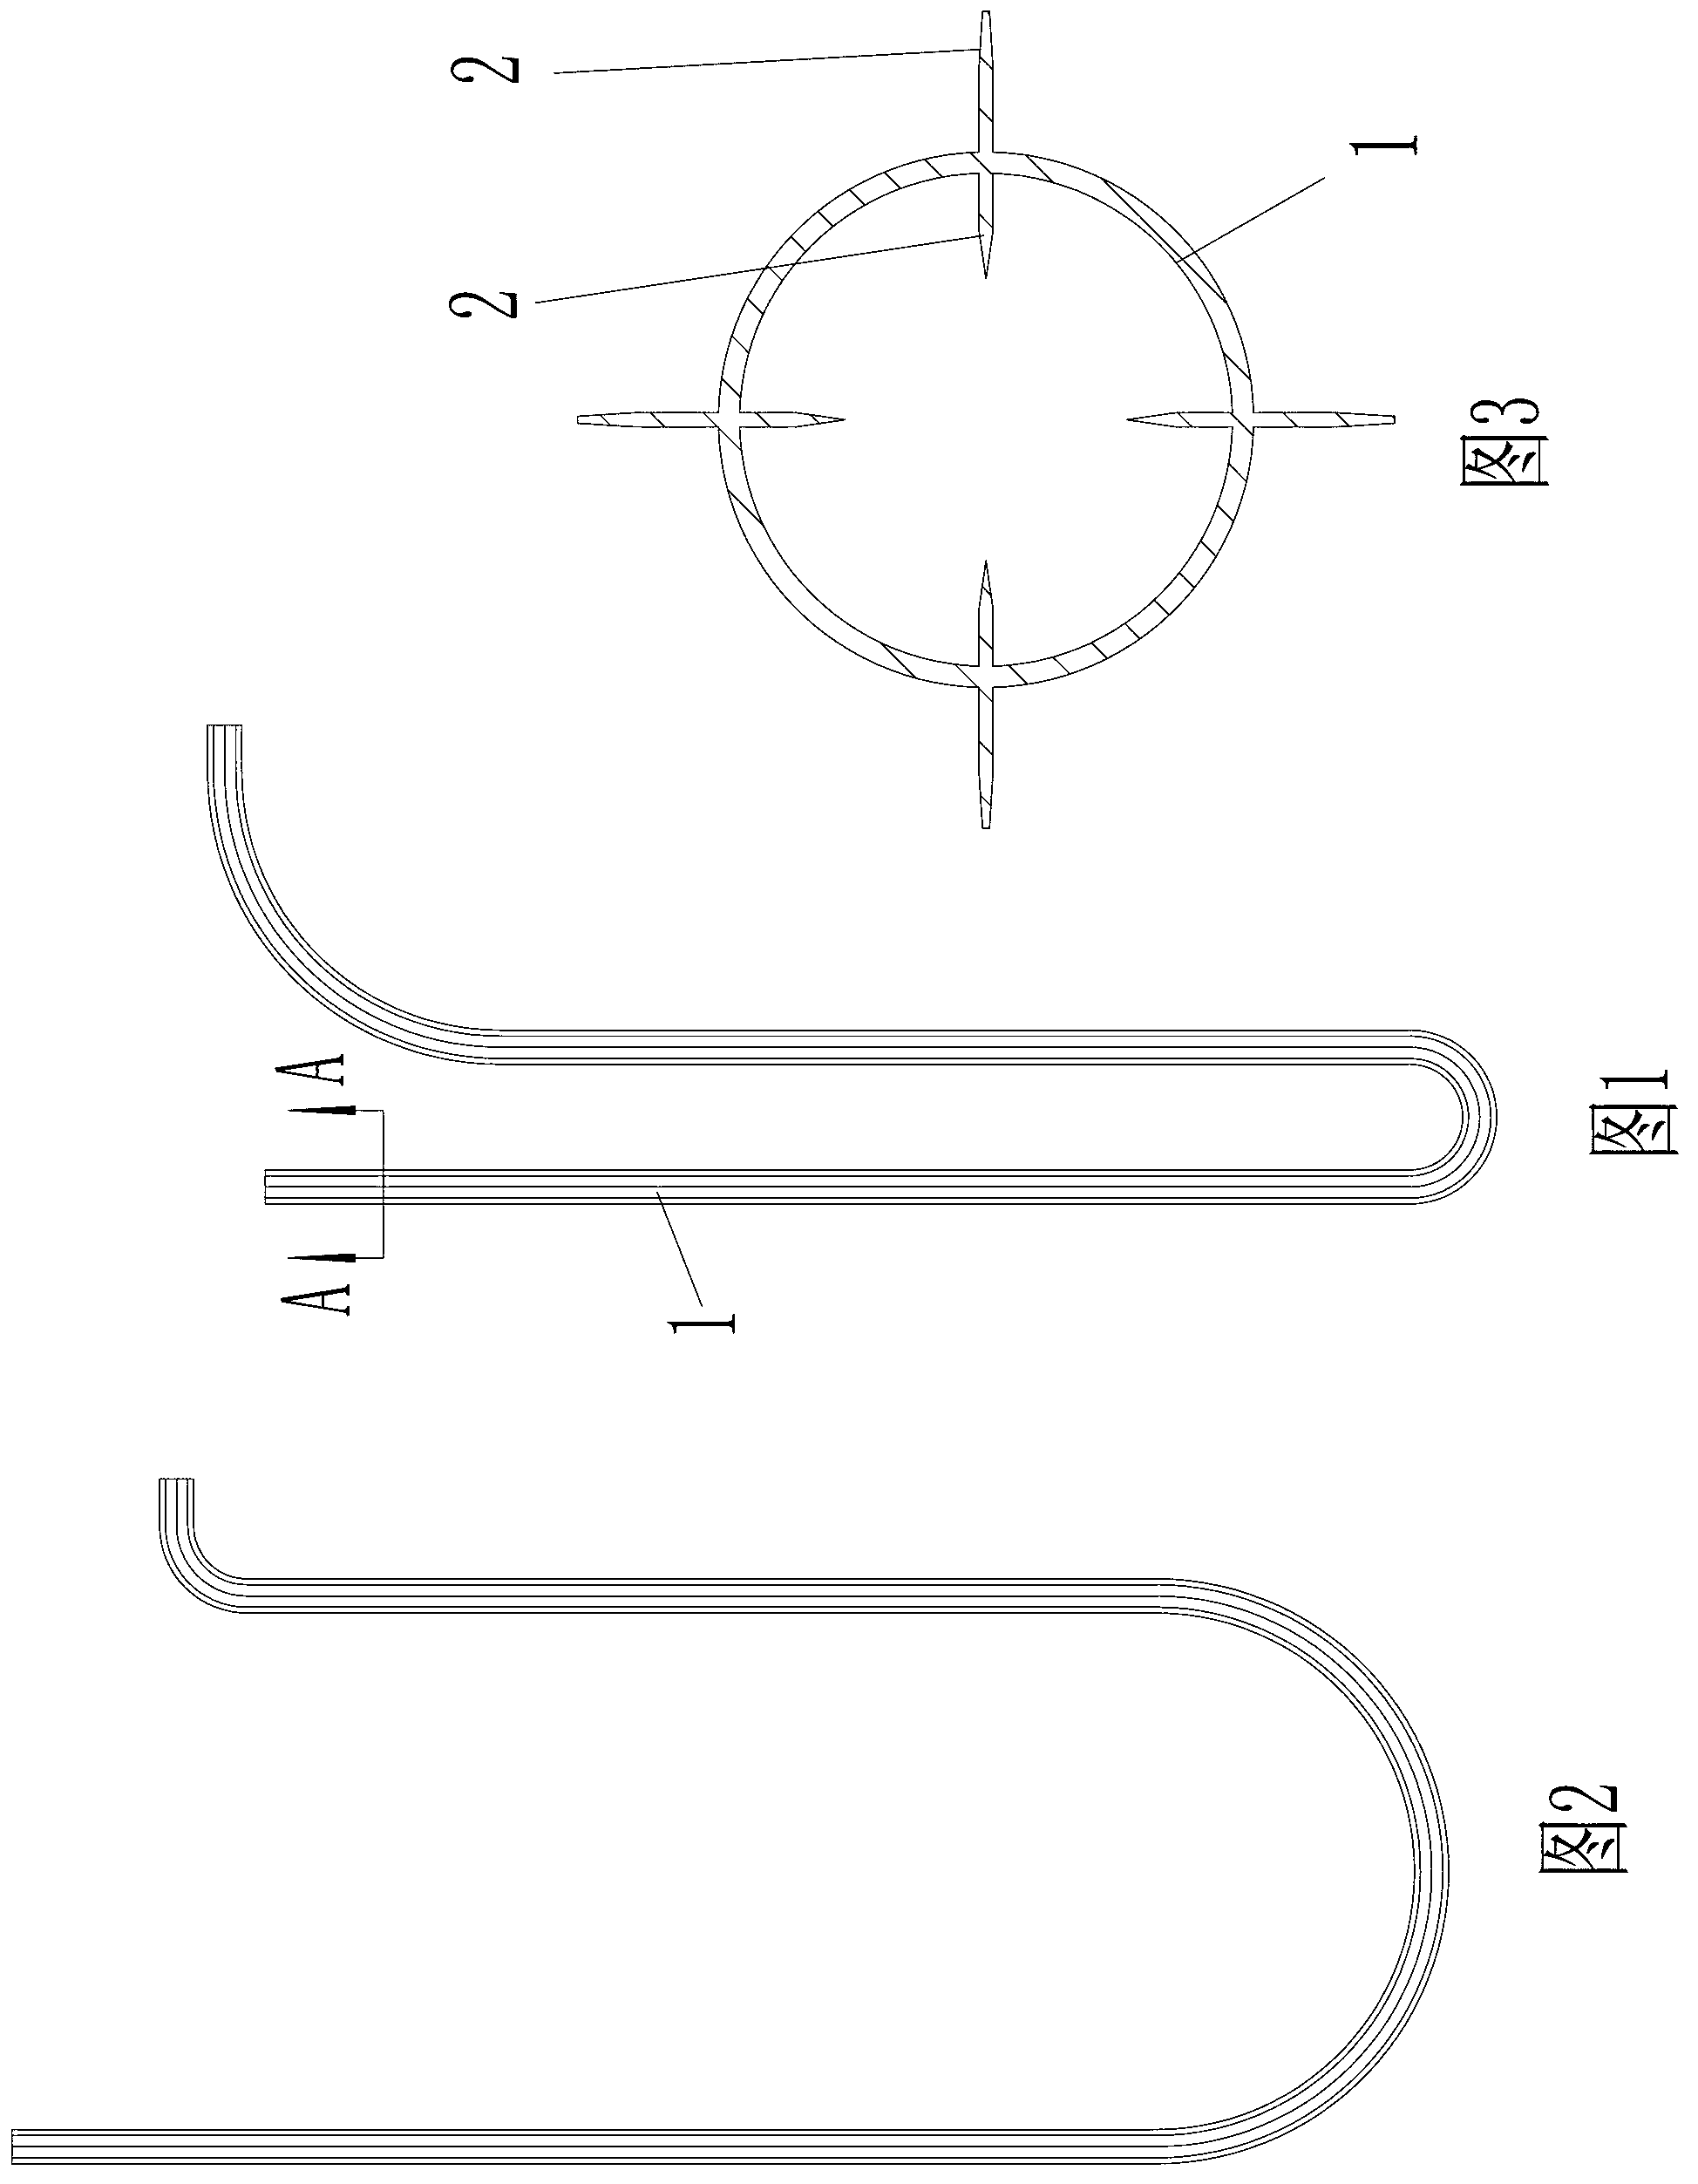 Heat conduction pipe of waste gas and waste fluid waste heat recovery device